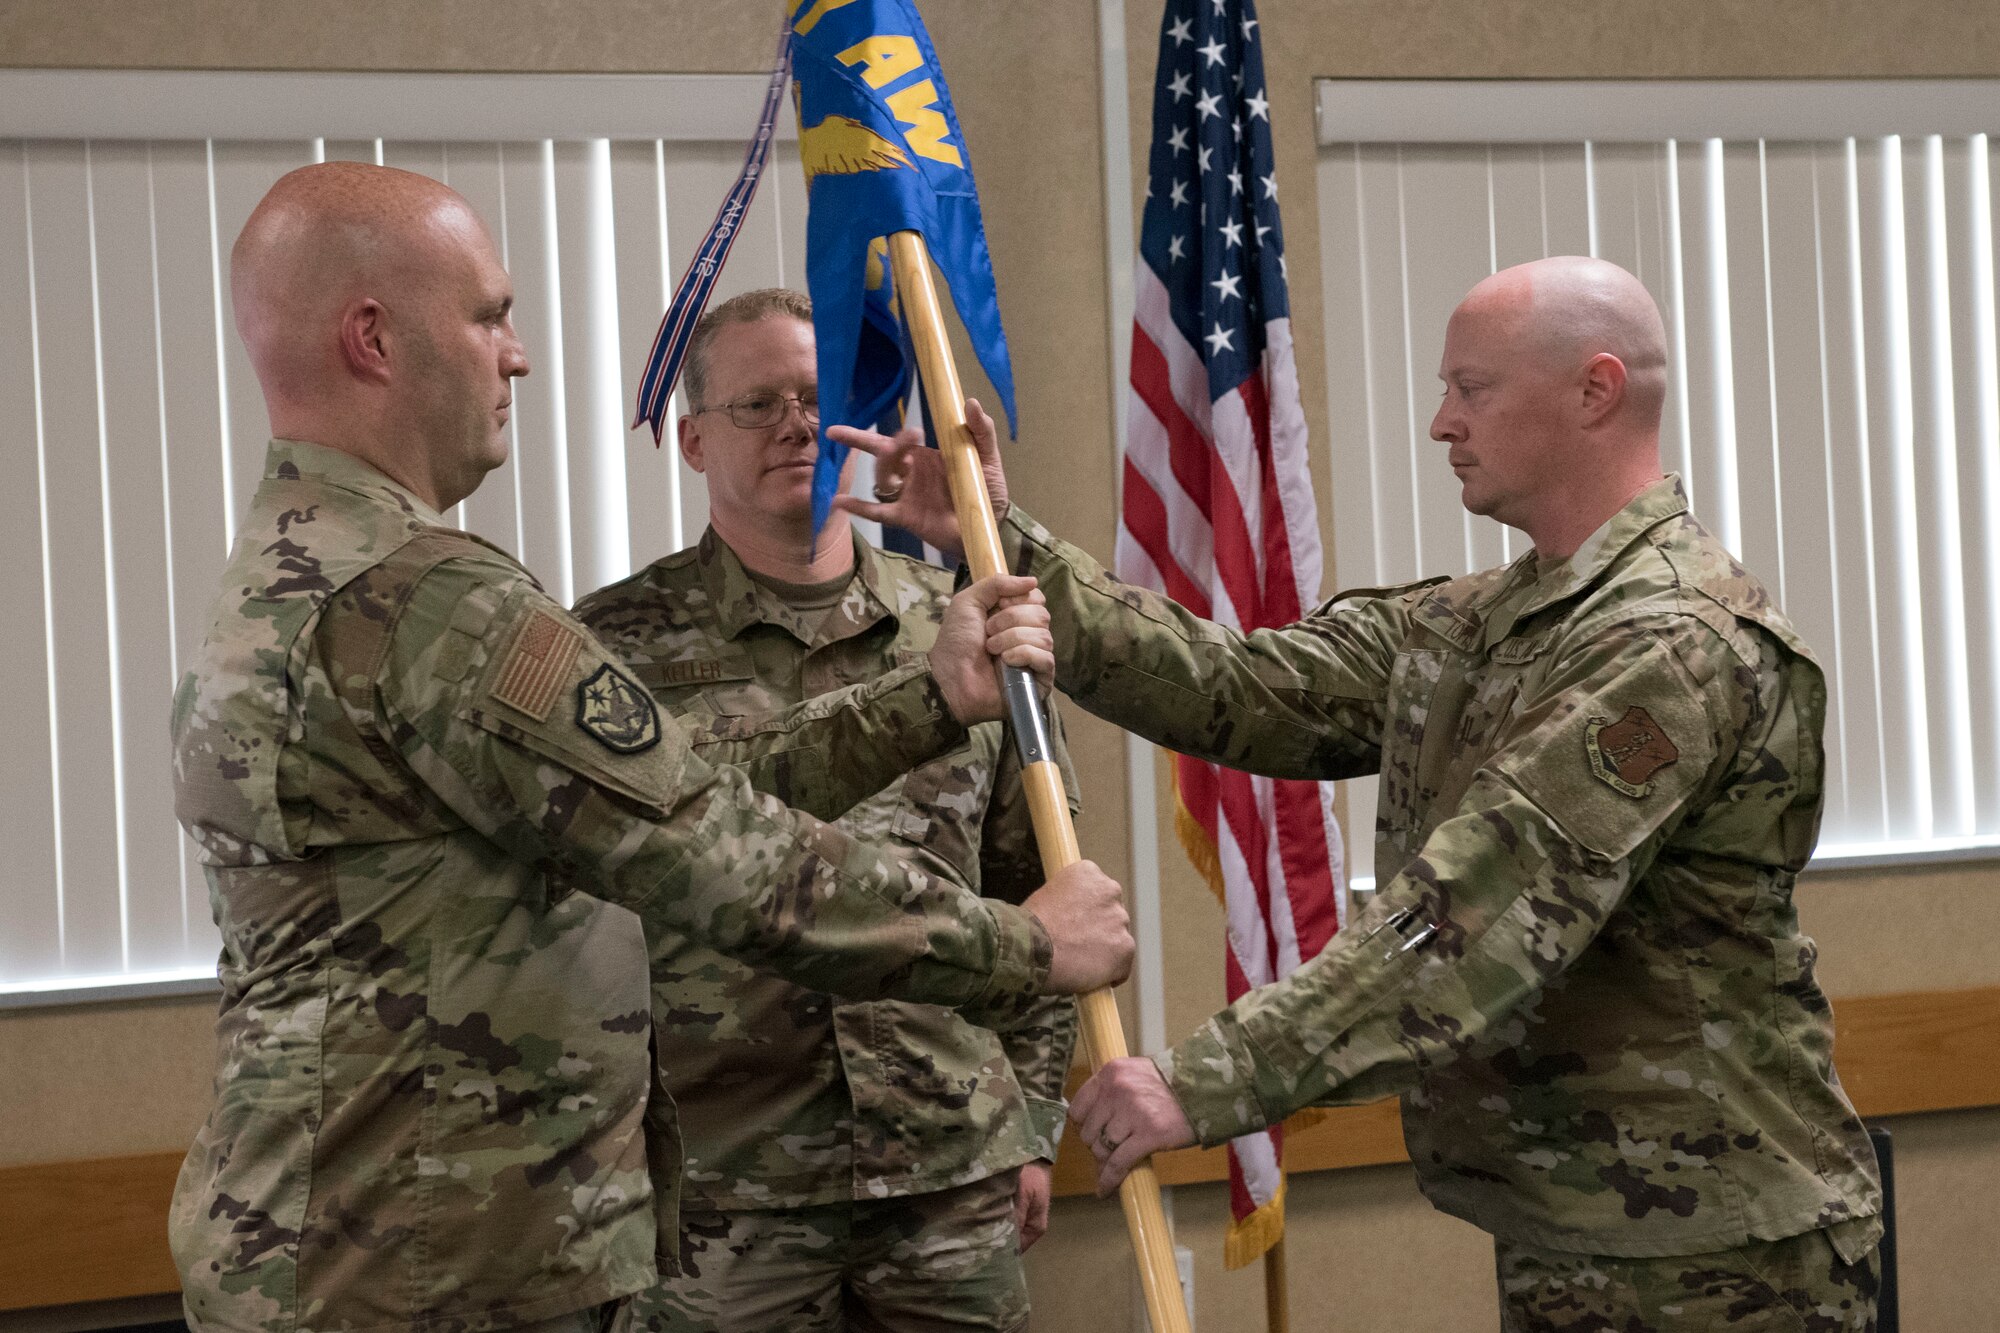 Capt. Rod Toms, right, accepts the 167th Security Forces Squadron guidon, from Col. Bill Annie, 167th Mission Support Group commander, during a change of command ceremony at the 167th Airlift Wing, Aug. 1, 2020. Lt. Col. Tim Rice relinquished command of the squadron to Toms during the ceremony.